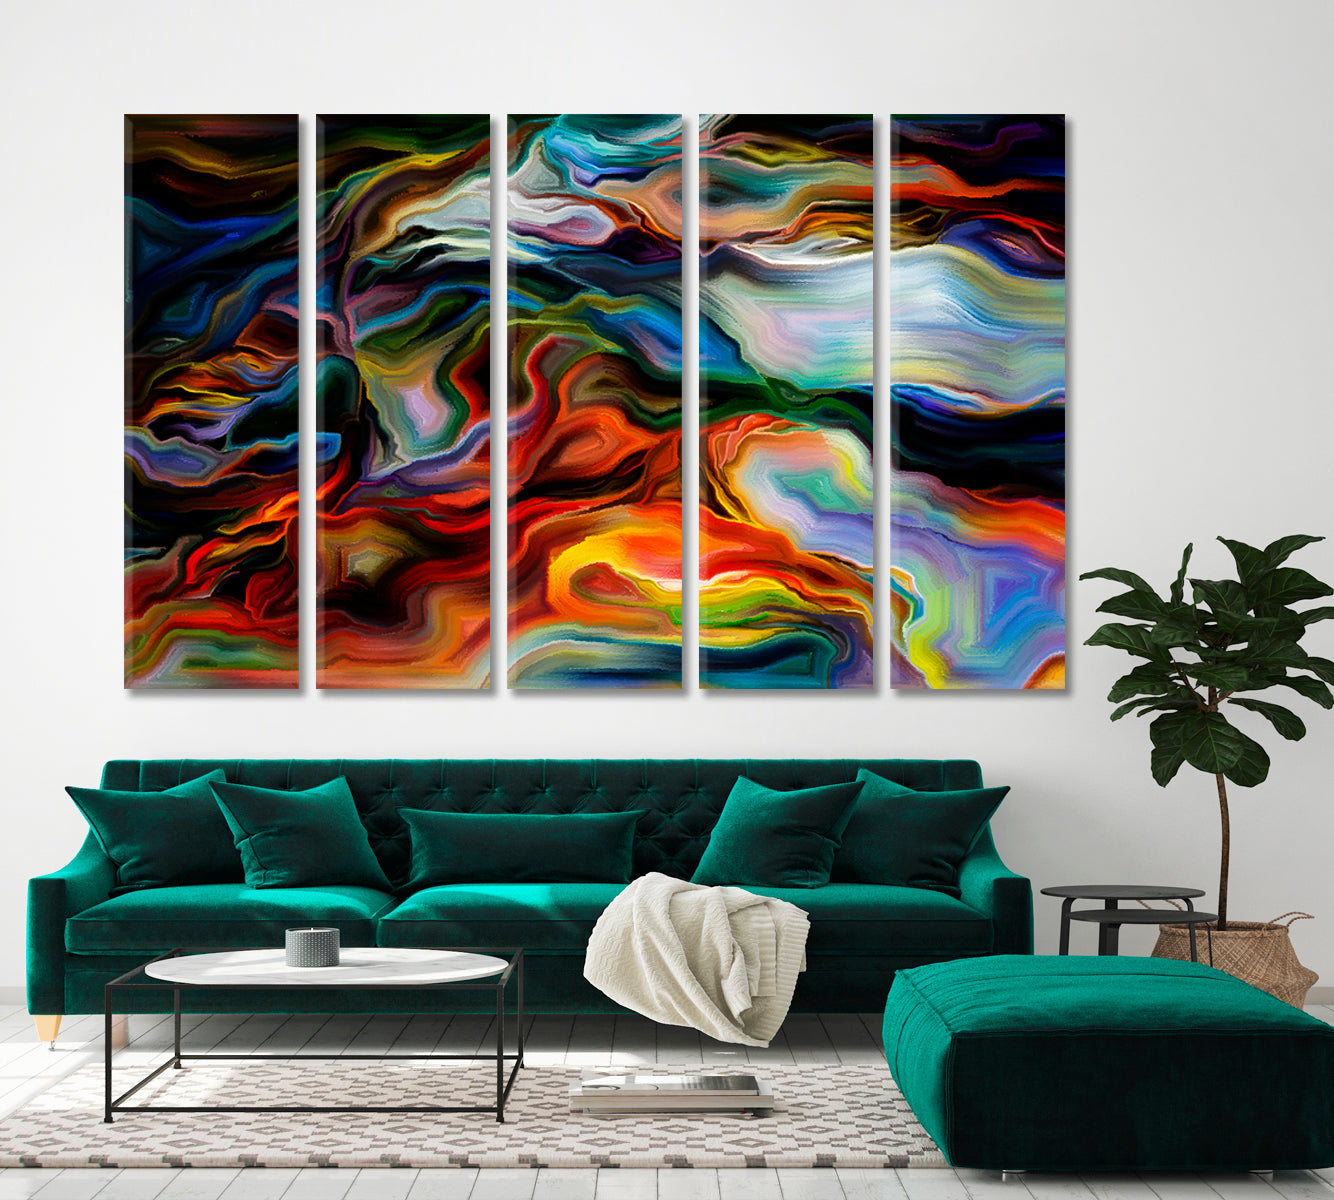 Abstract Art and Nature Abstract Art Print Artesty 5 panels 36" x 24" 